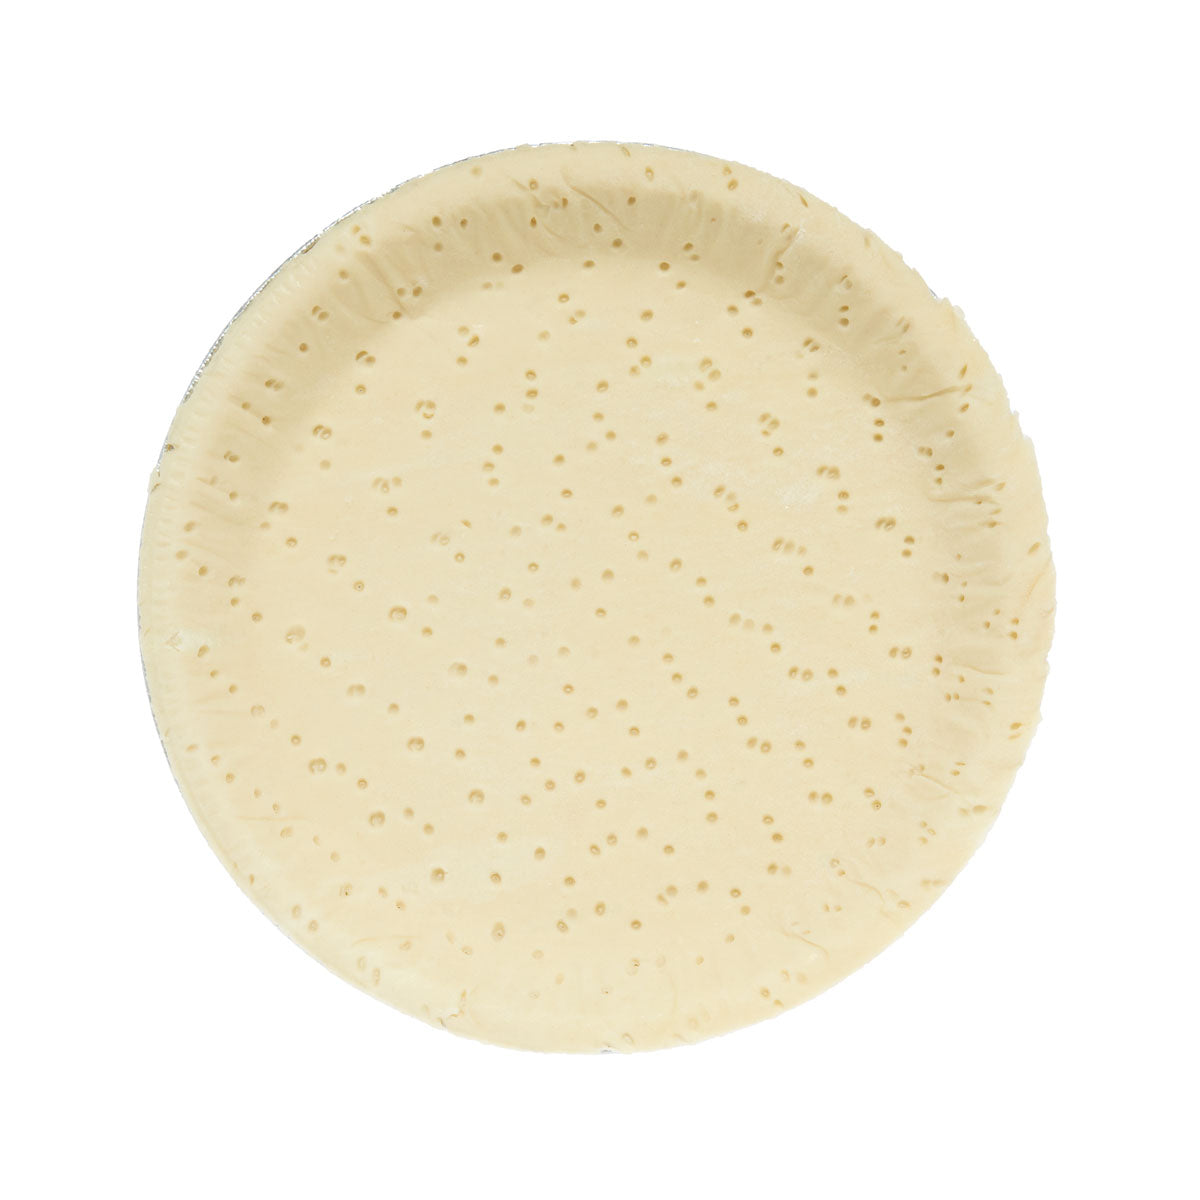 Dufour Pastry Kitchens Plant Based Pie Shells 10"